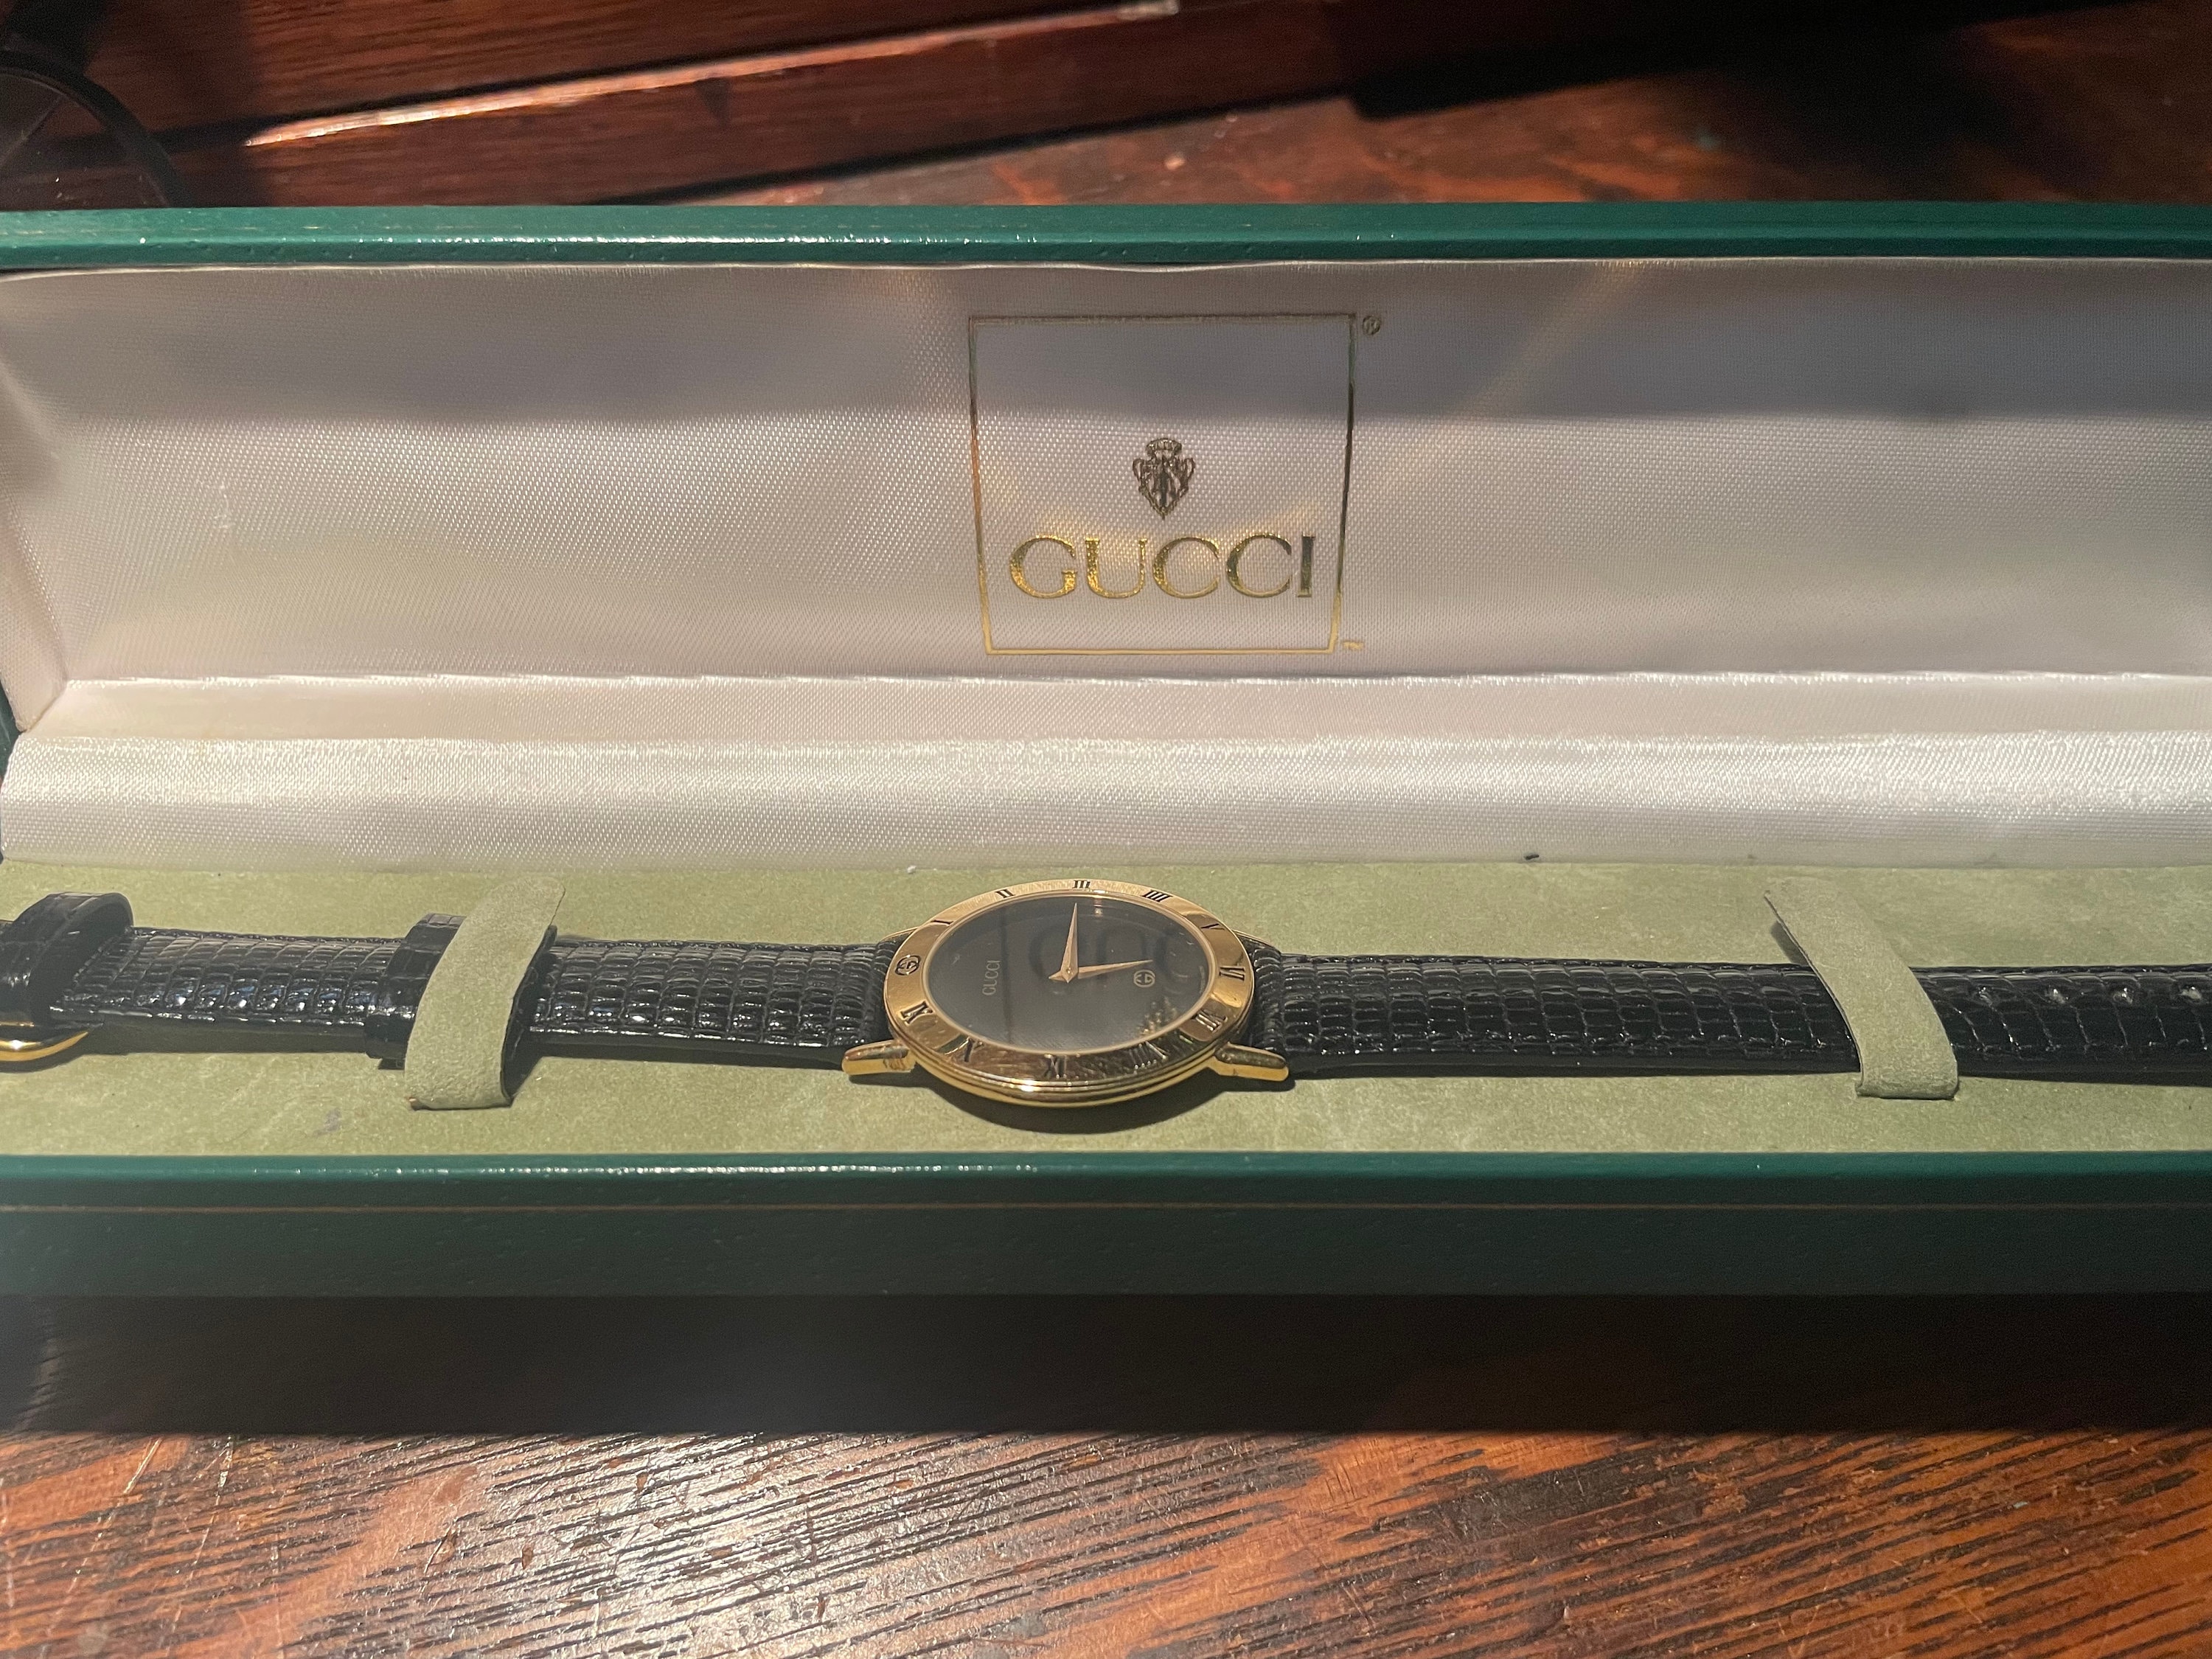 Gucci Belt With Accessories Best Price In Pakistan, Rs 3000